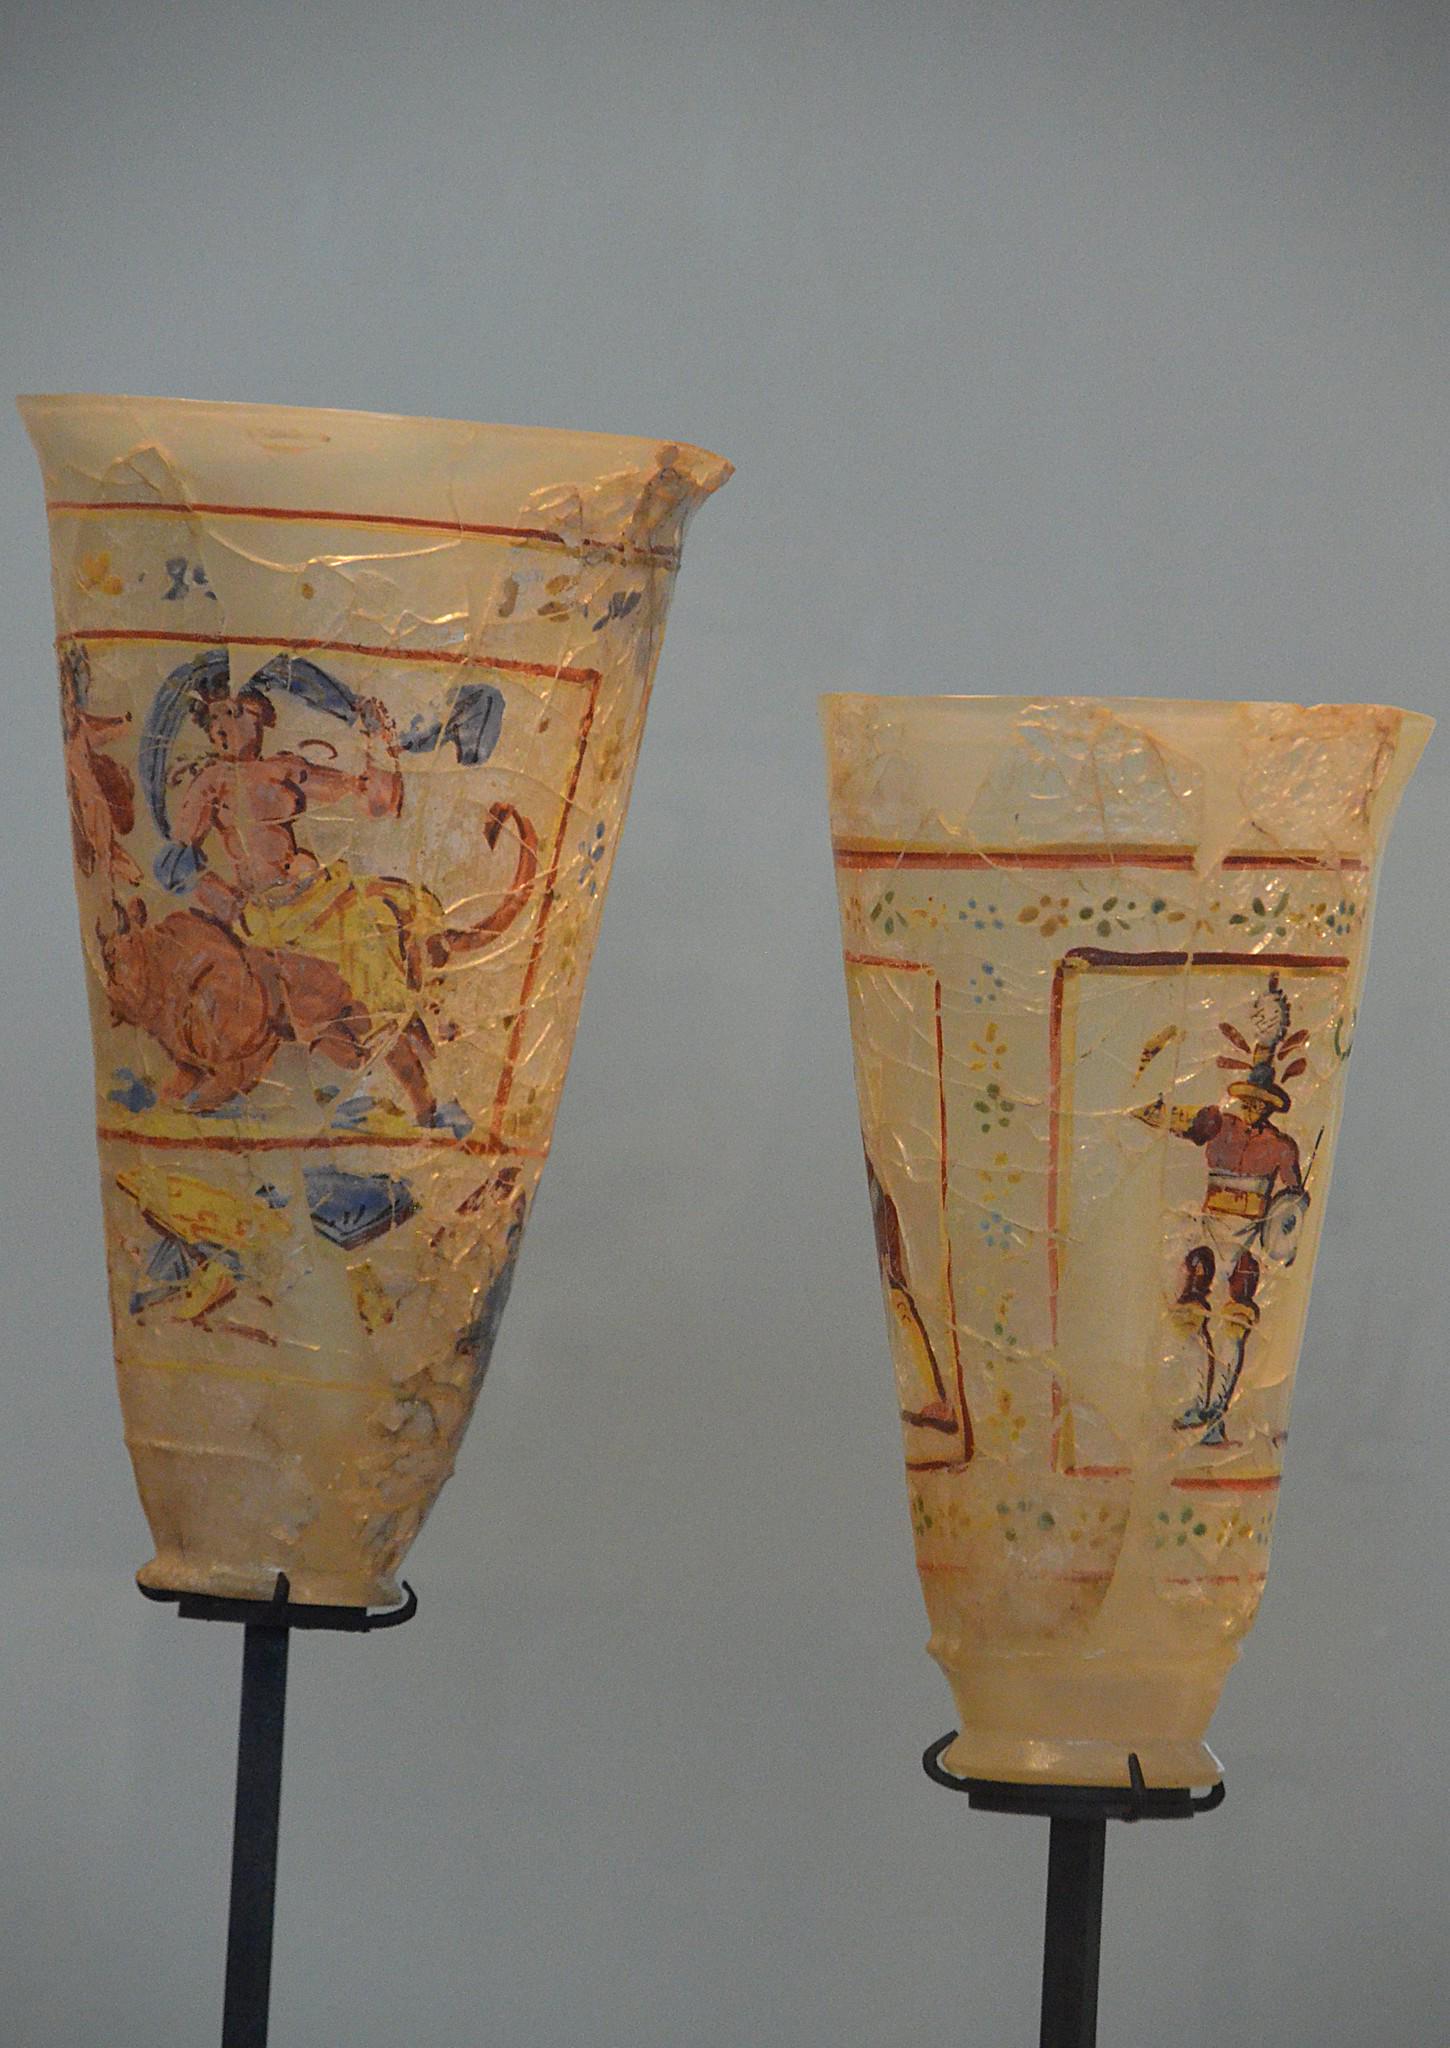 Two painted Glasses showing the abduction of europa(left) and a roman gladiator(right), 1st century CE, Afghanistan.jpeg